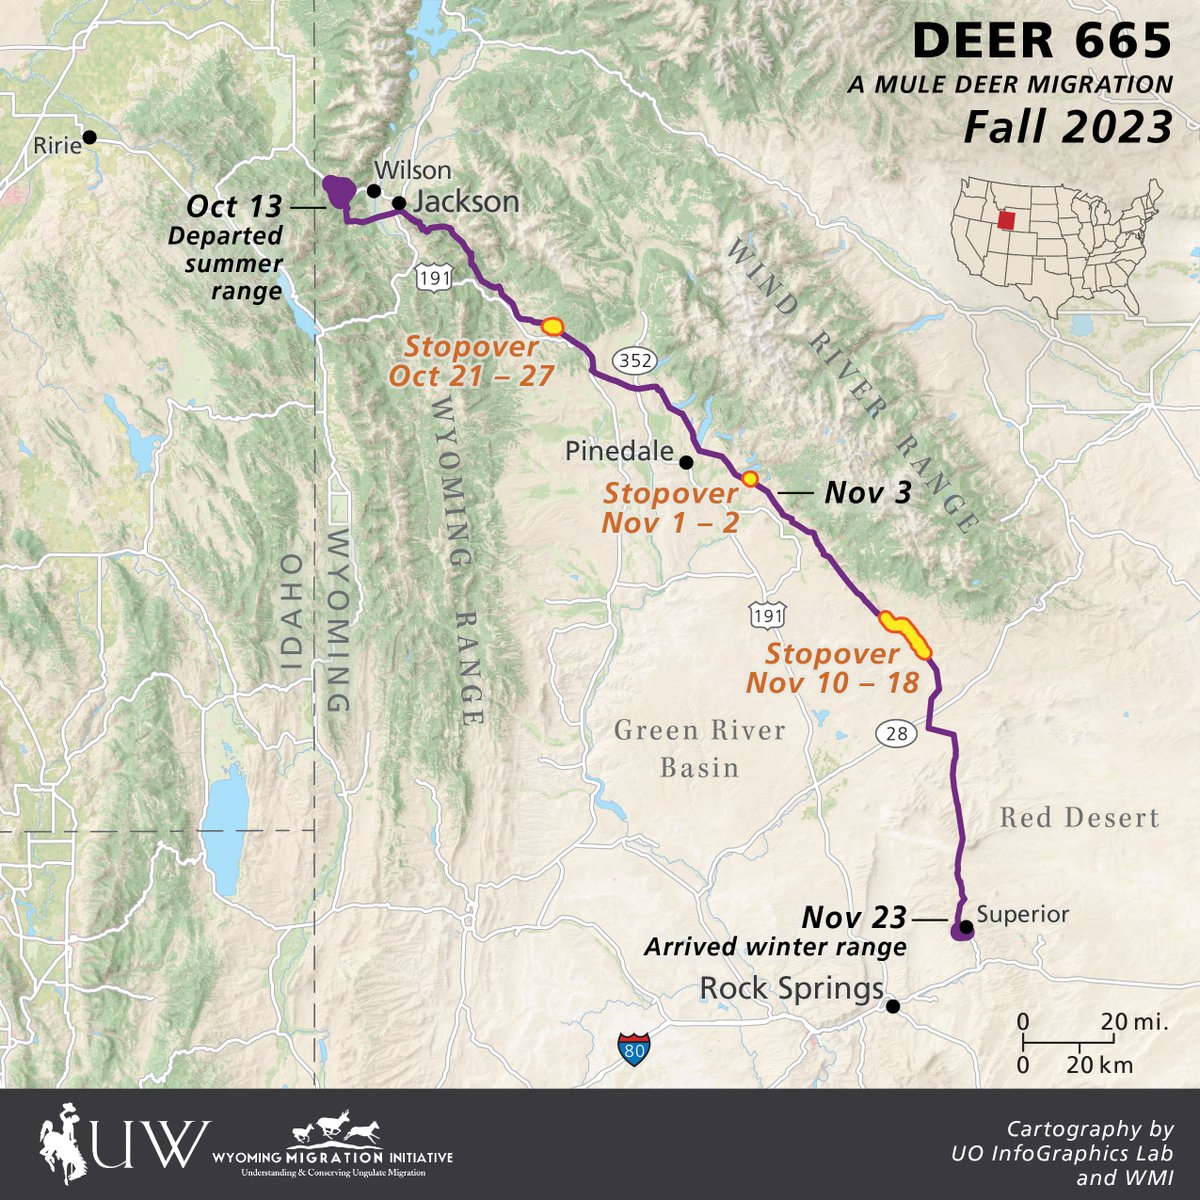 Migration update! #Deer665 has completed her journey from Teton Pass in #JacksonHole to the Red Desert, totaling 180 miles in 42 days, with 16 days of stopover. Here'e hoping all migratory wildlife get a less severe winter than last year. Happy holidays everyone! #Deer